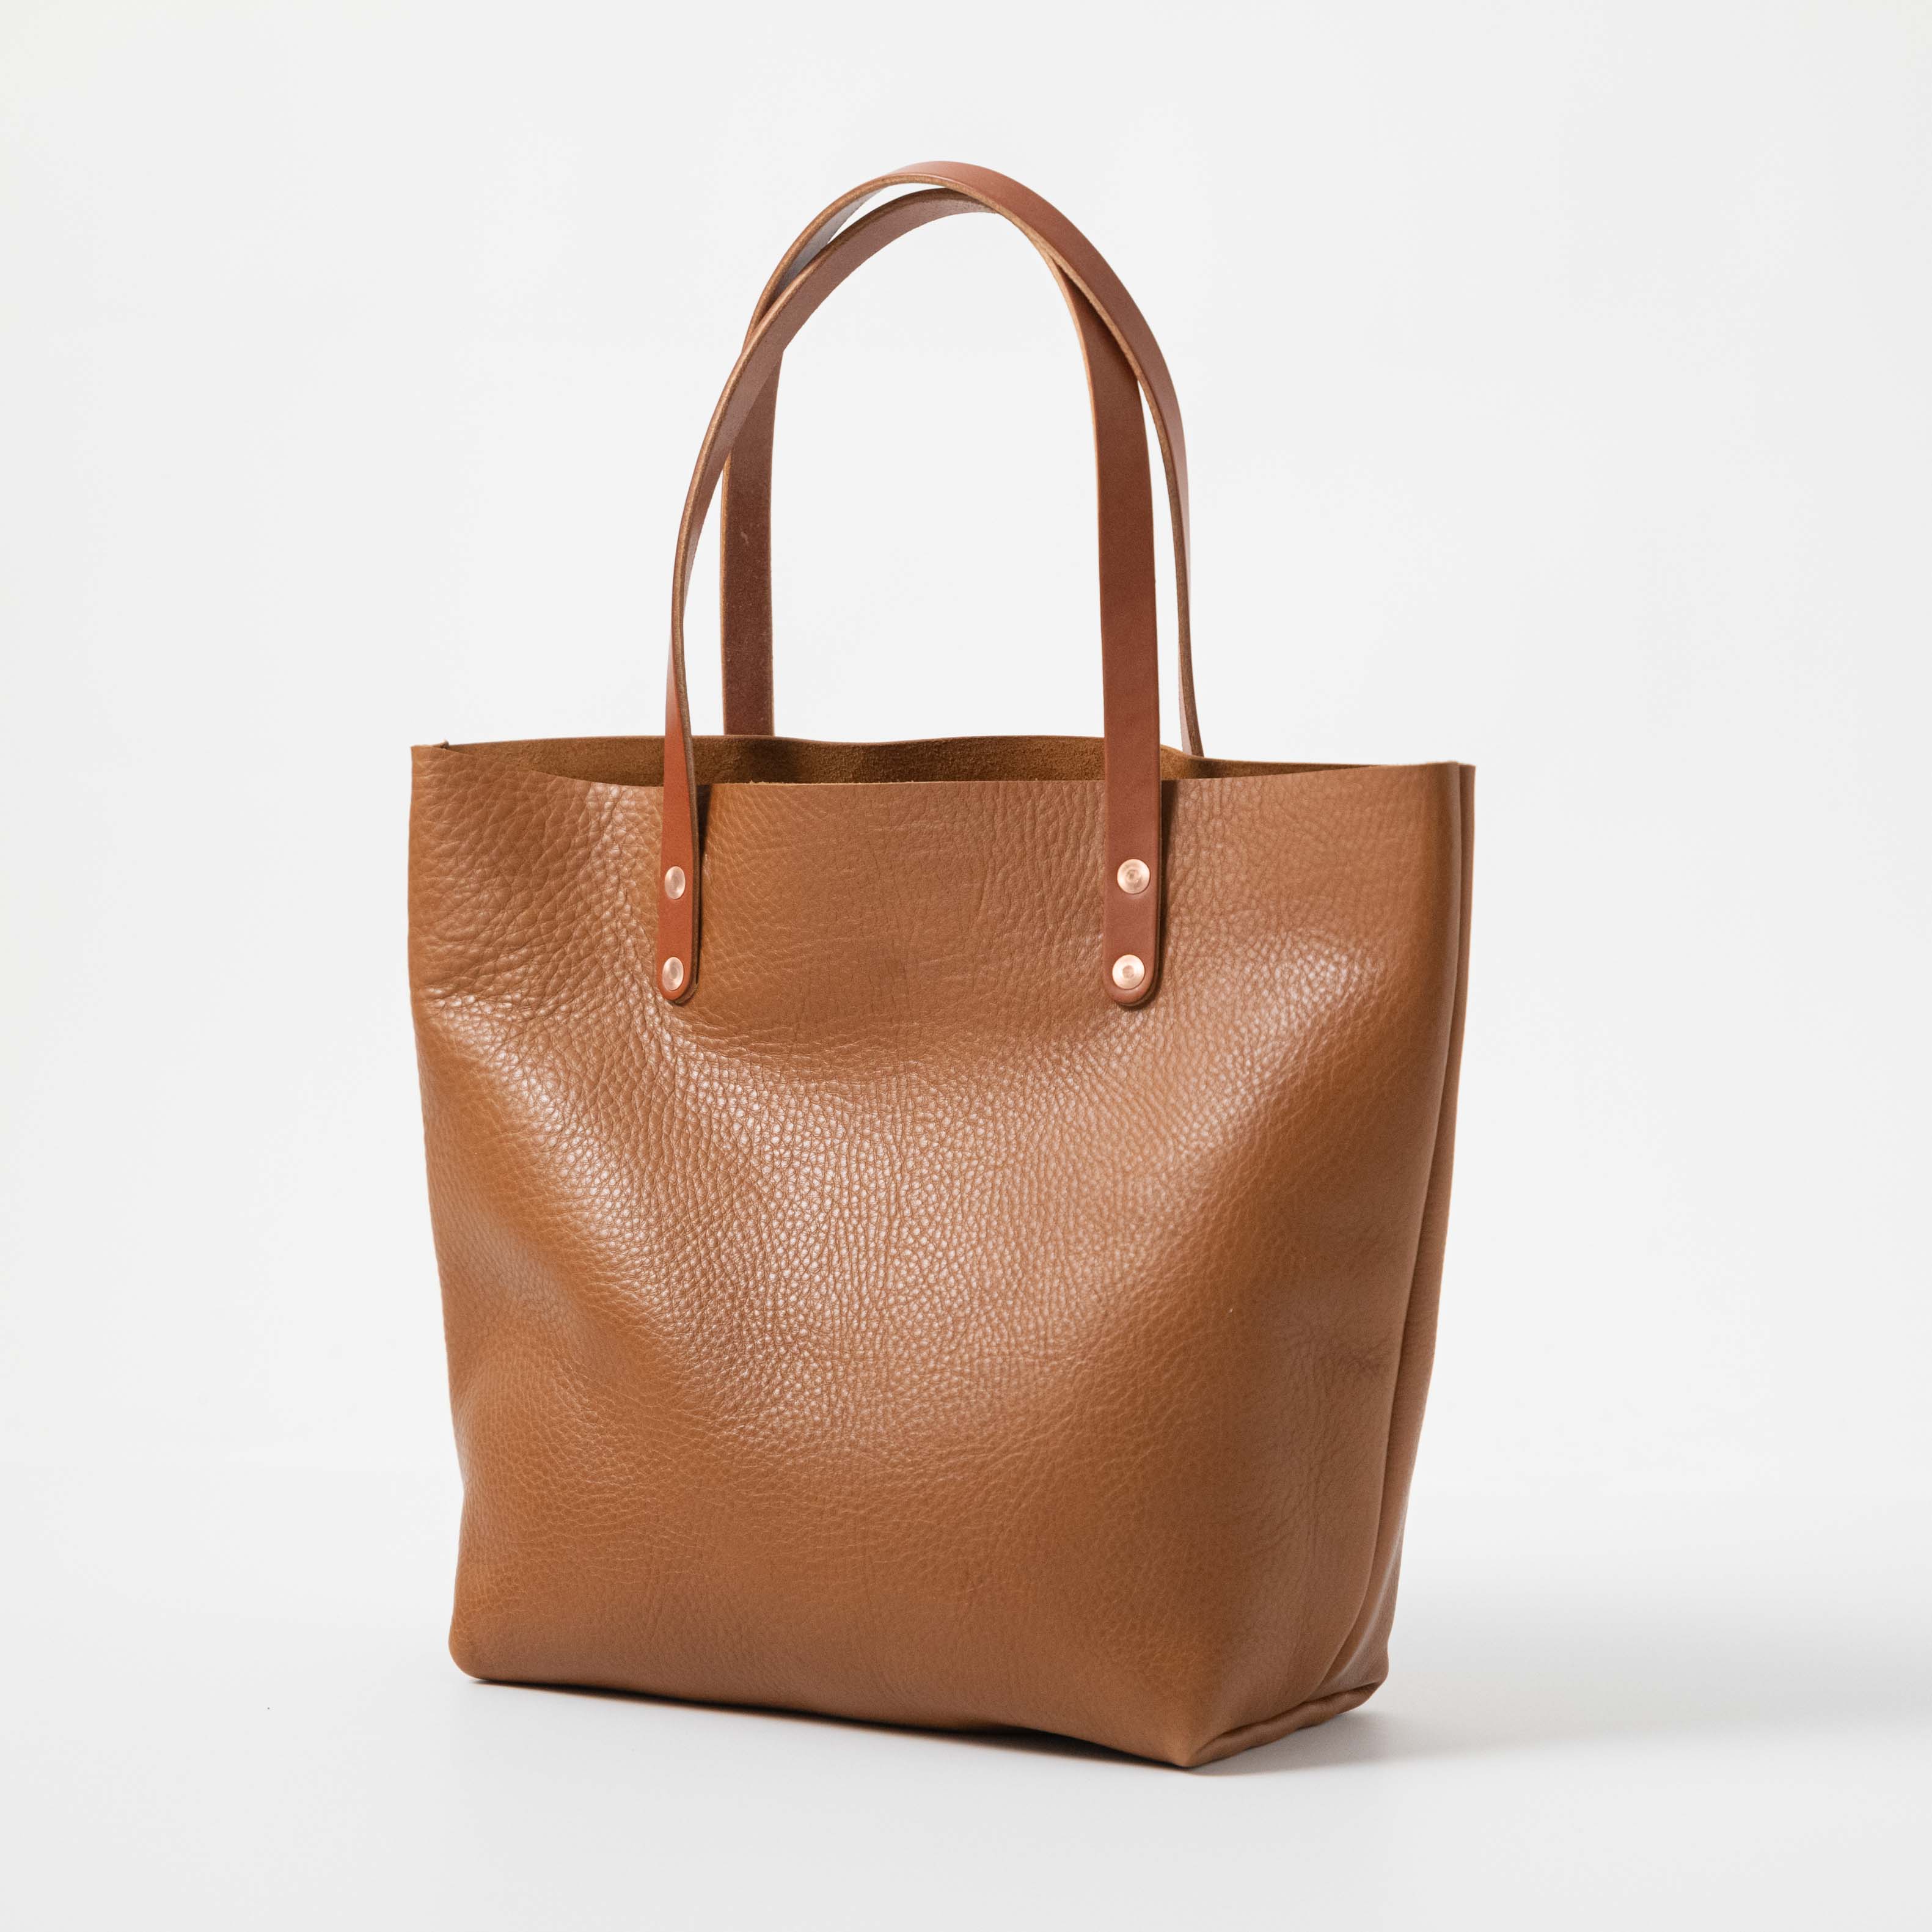 Cognac Cypress Tote | Leather Tote Bag Made in The USA by KMM & Co. 10-Inch +$25 / Crossbody Strap (FINAL Sale) +$65